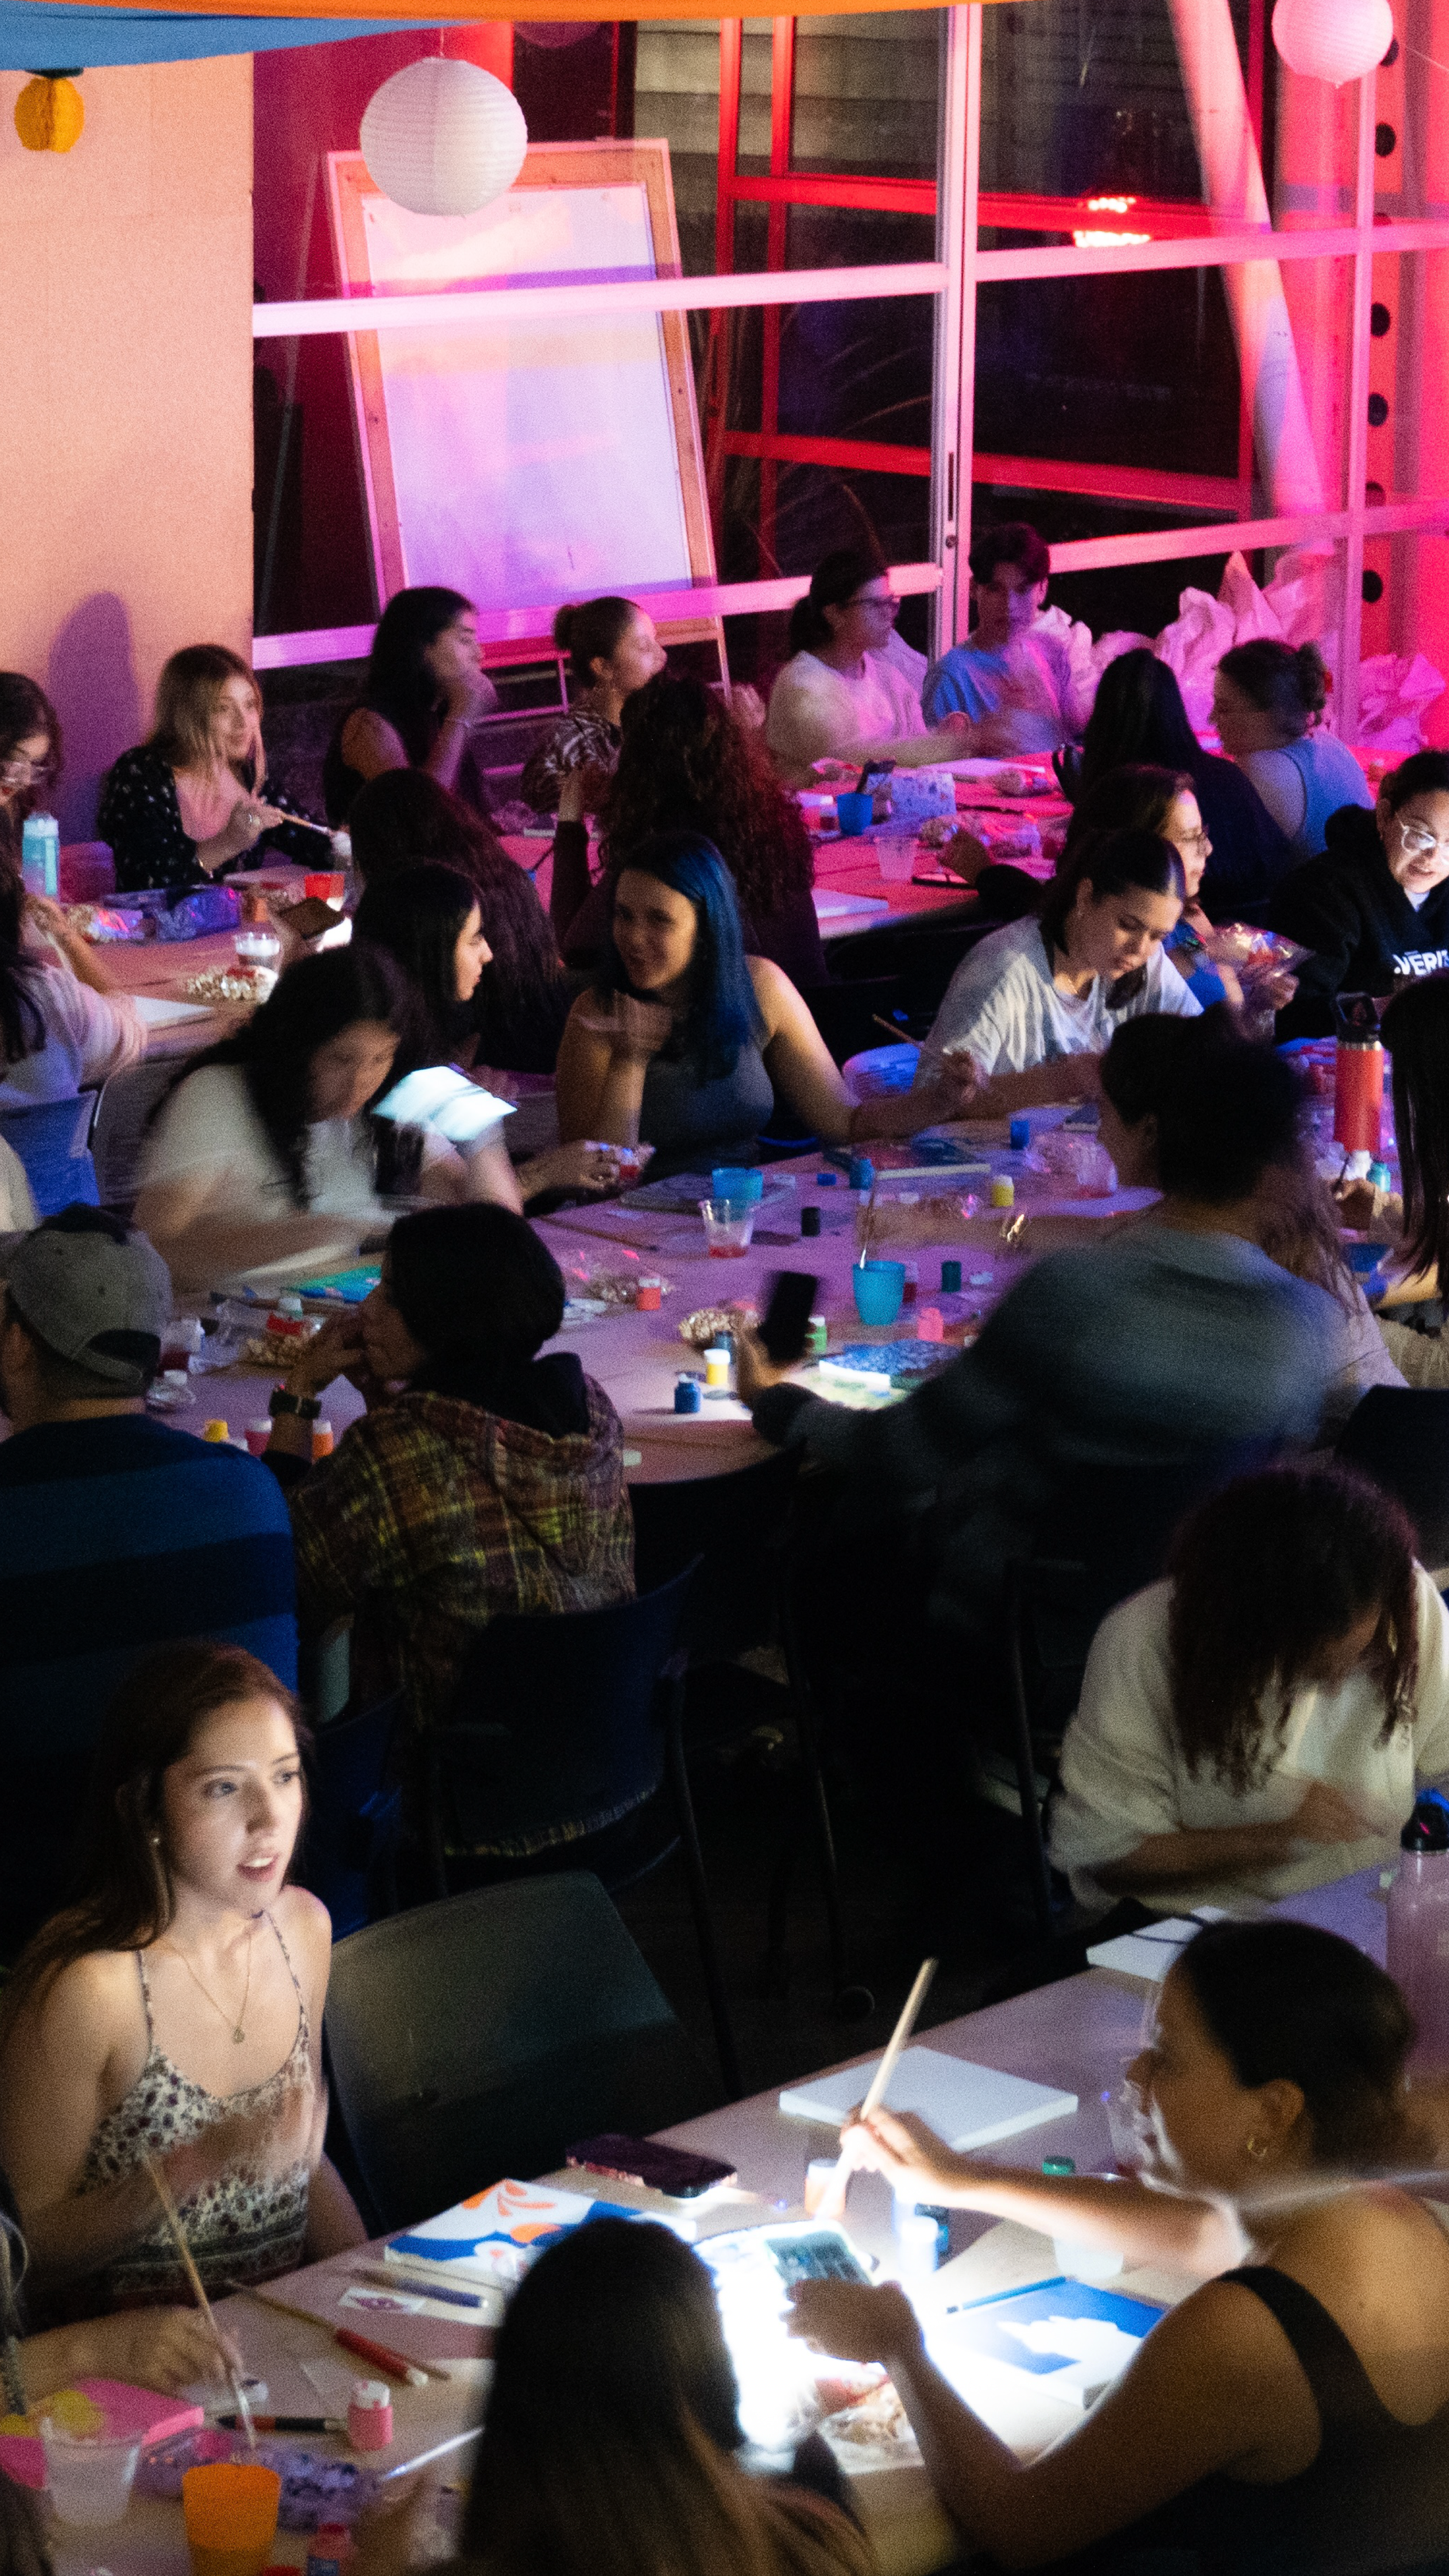 A bustling indoor art workshop, with participants focused on painting, illuminated by soft overhead lighting.